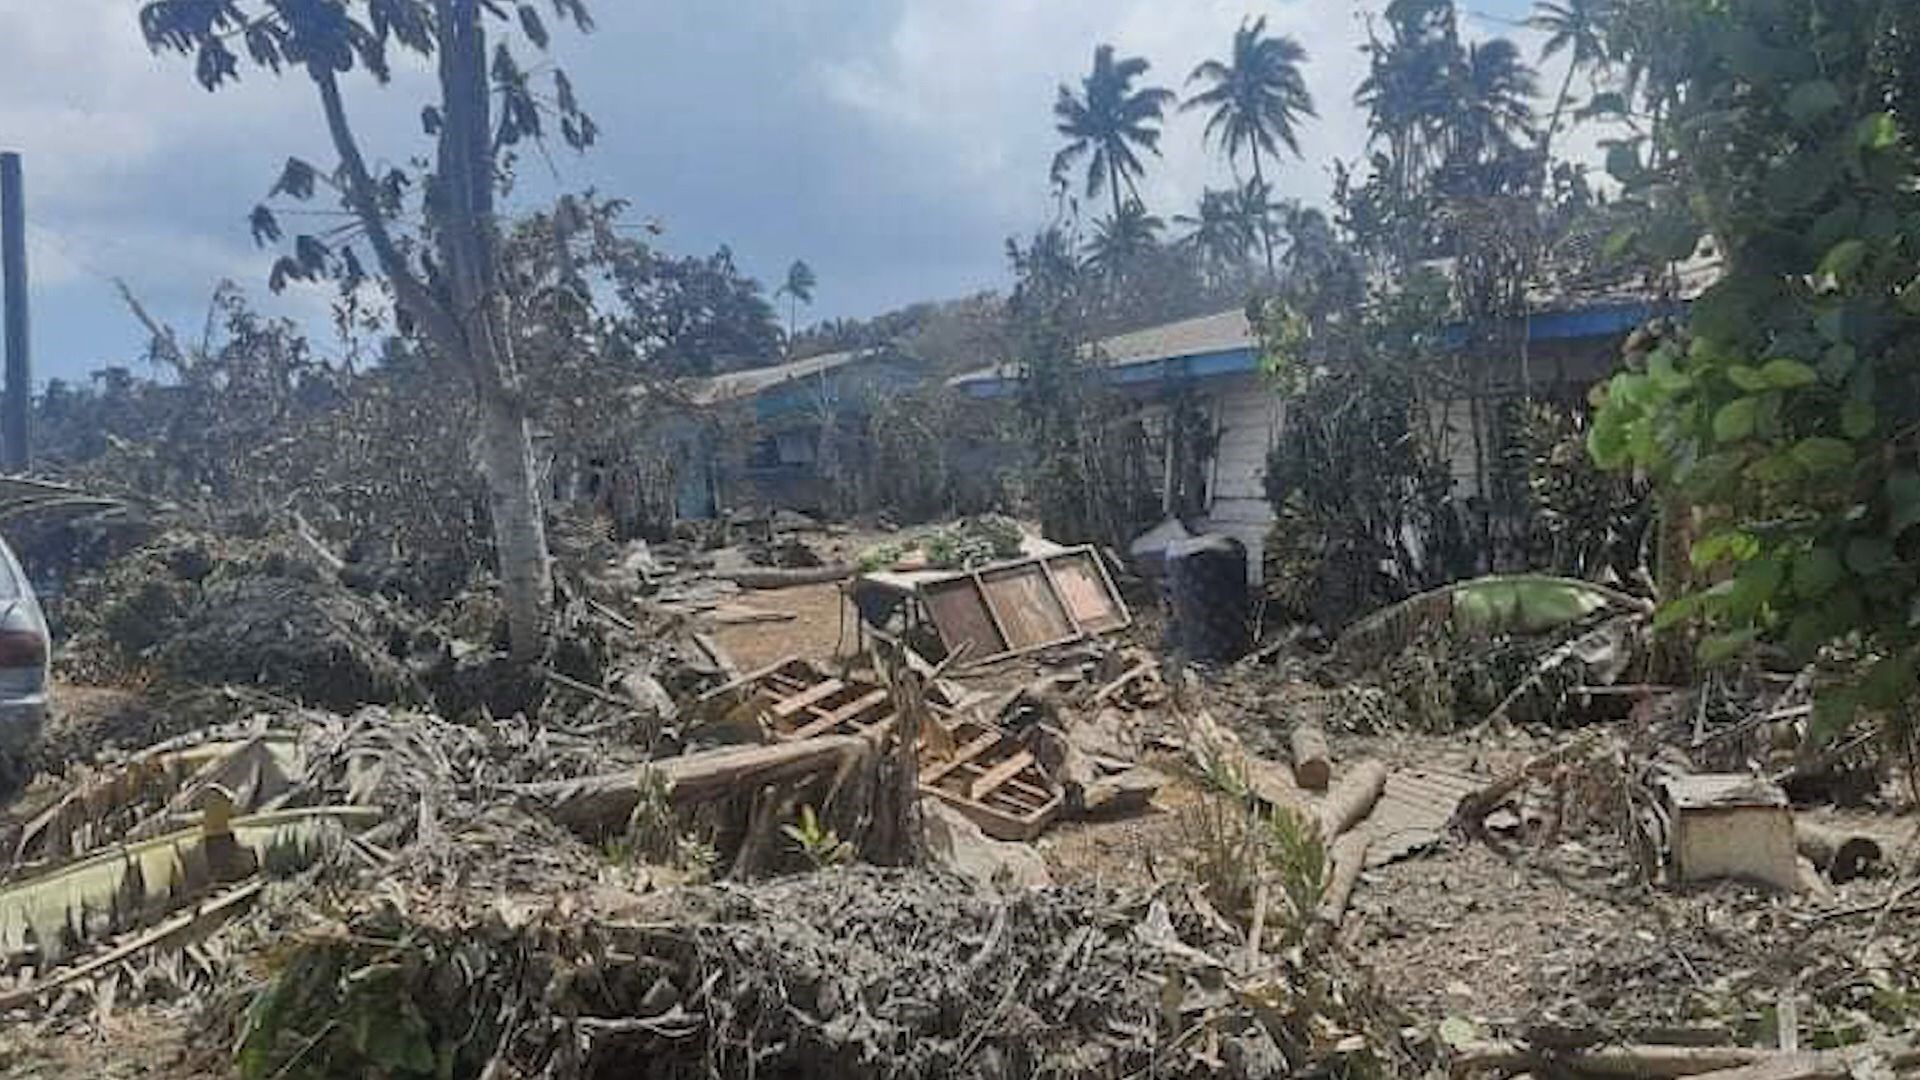 "Their homes are gone, that’s why they are in need of these resources. They lost everything. It's all destroyed. It's very sad to see," said Siona Thompson.